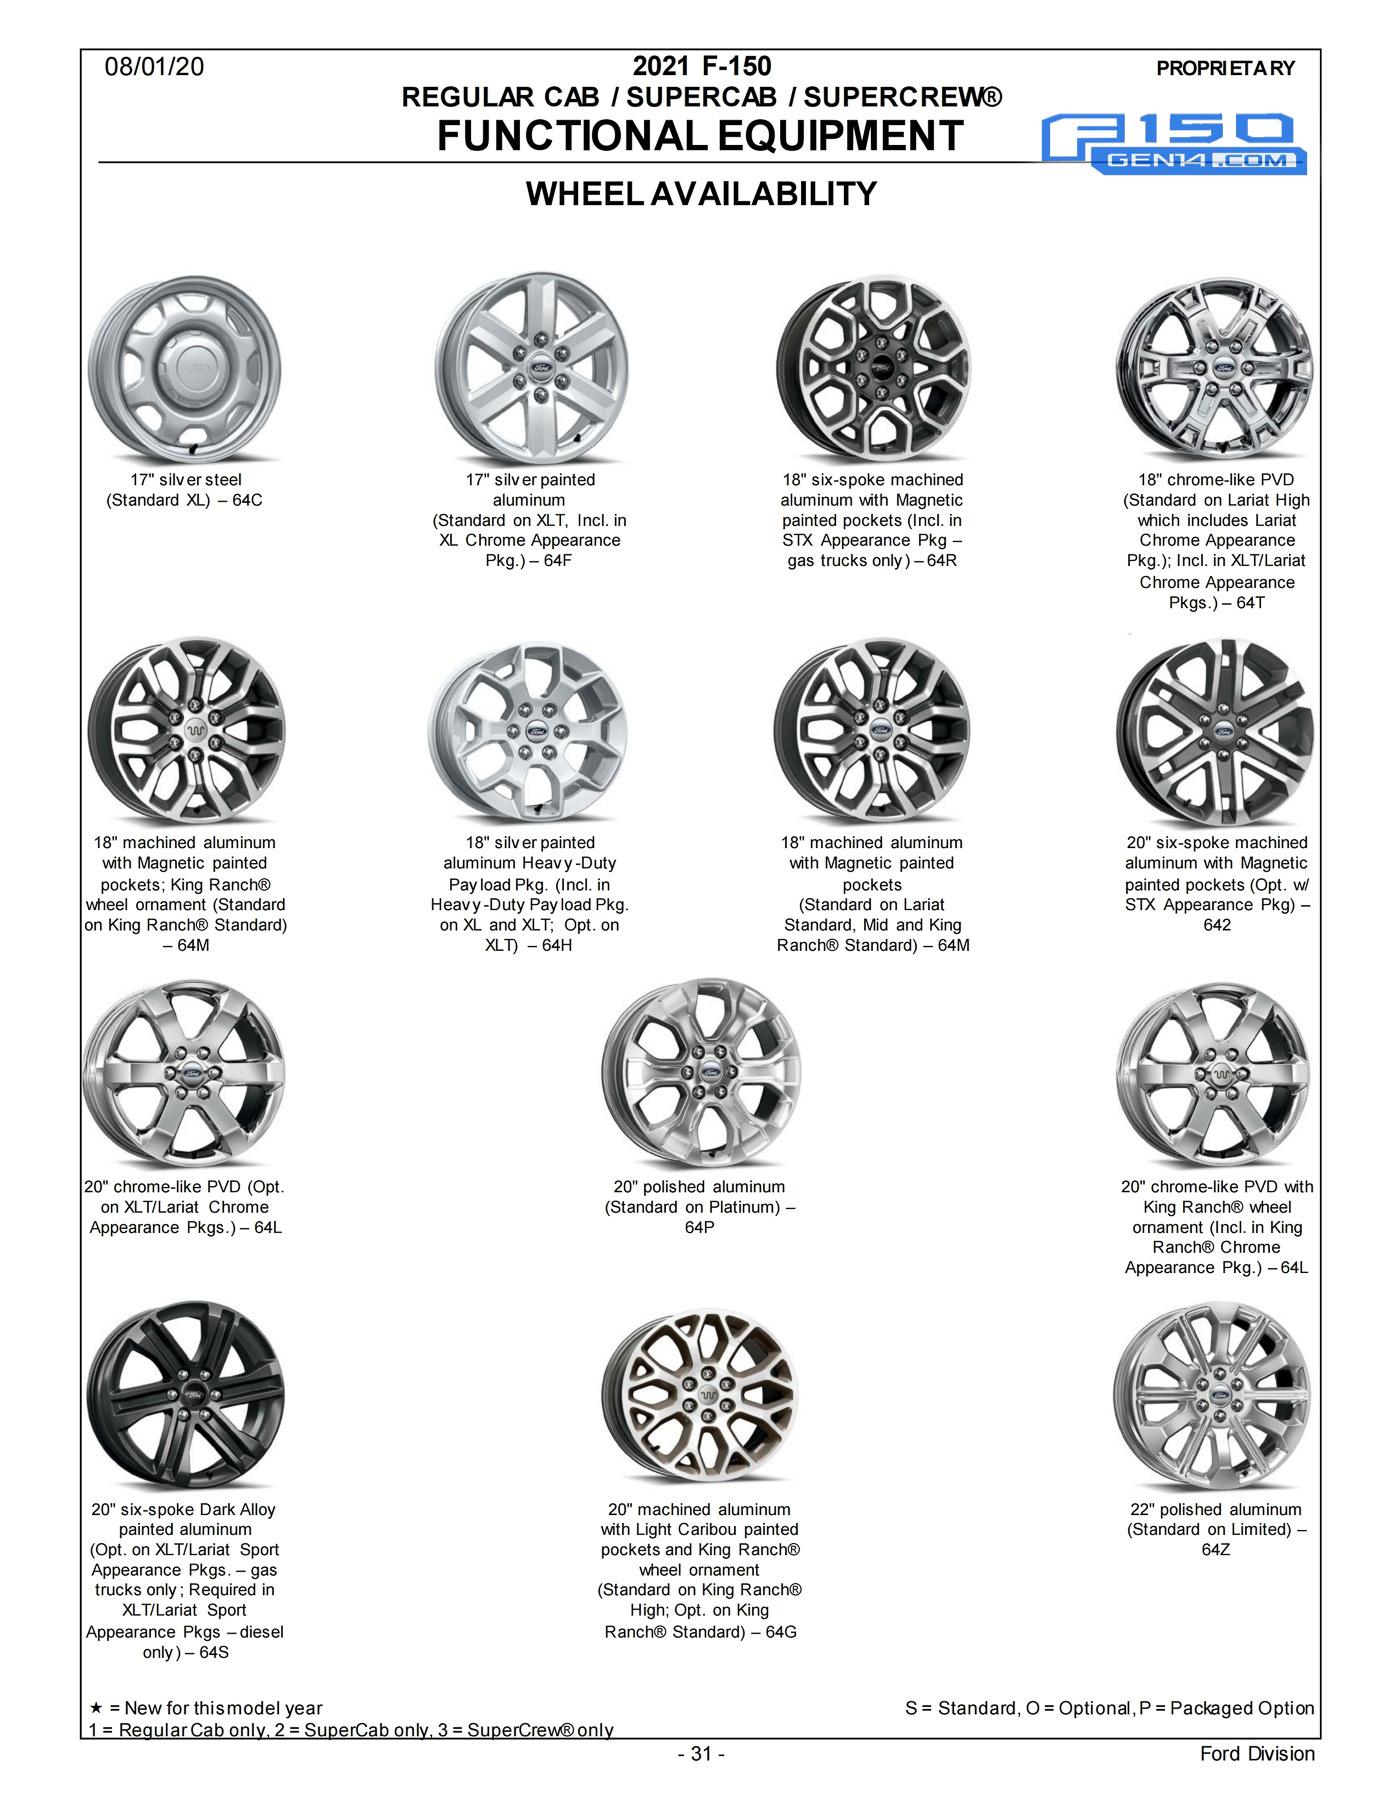 2021 F-150 Factory Wheels Sizes/Specifications